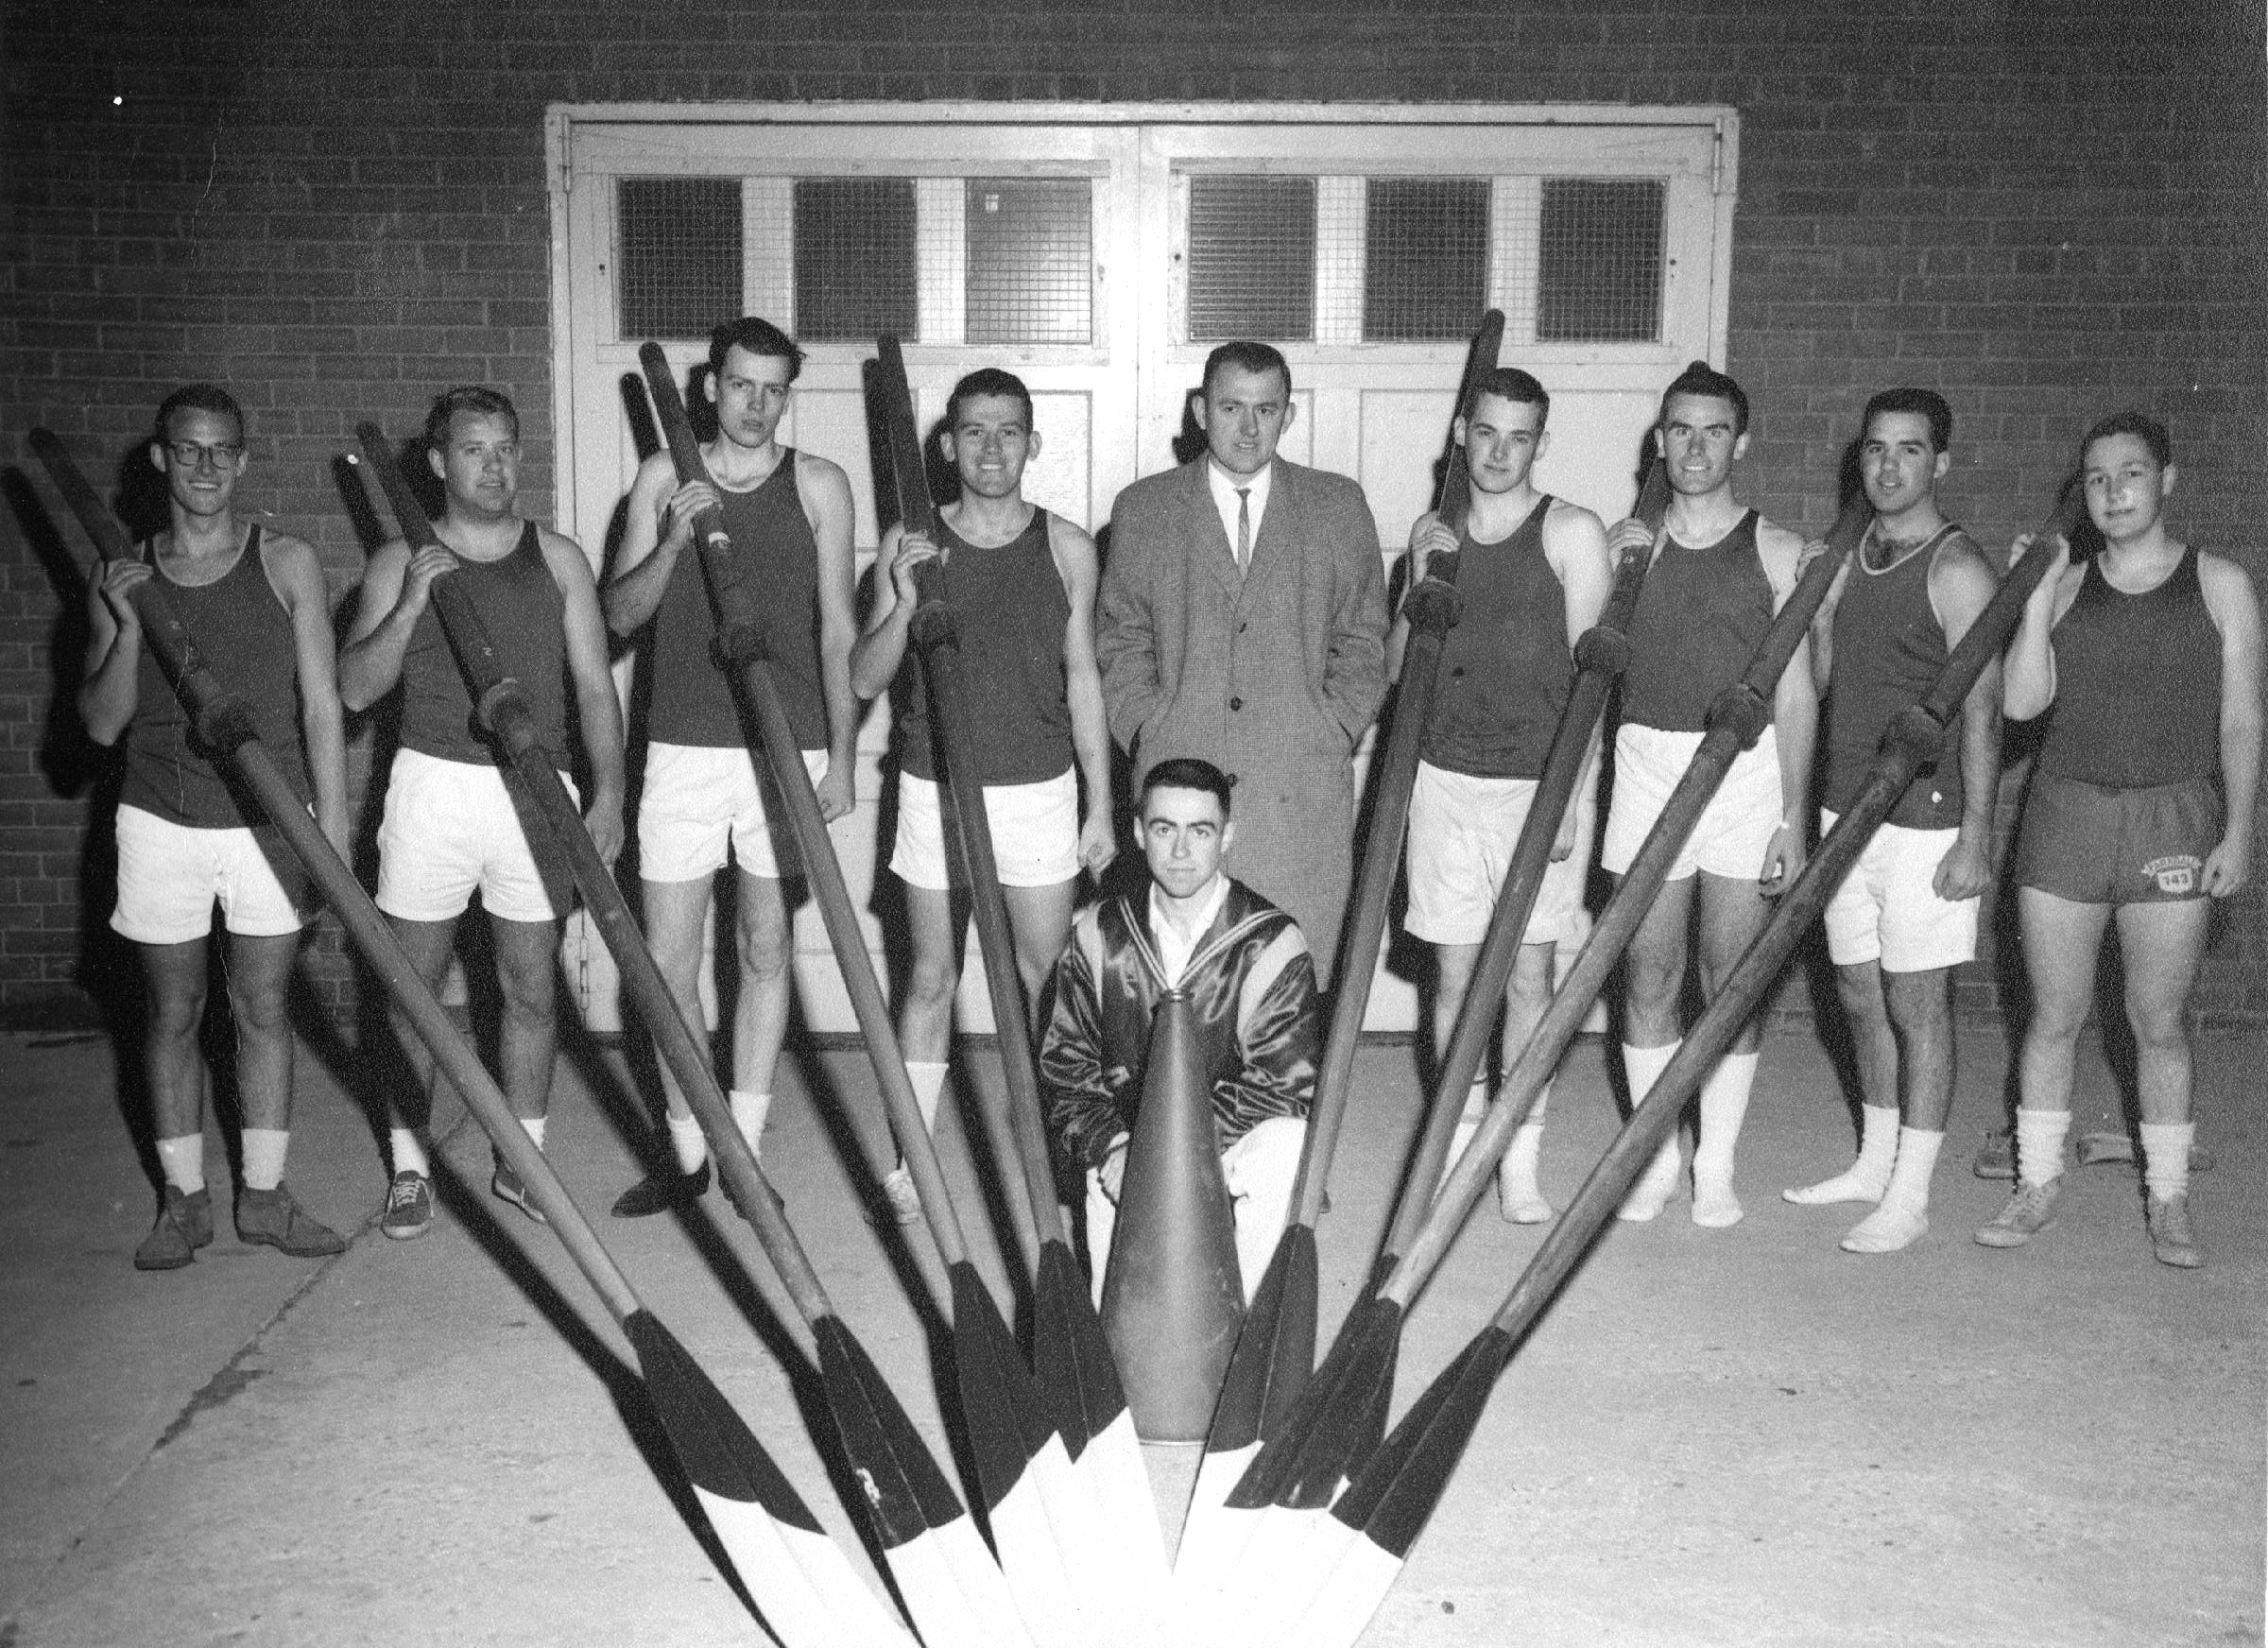 The 1964 rowing team